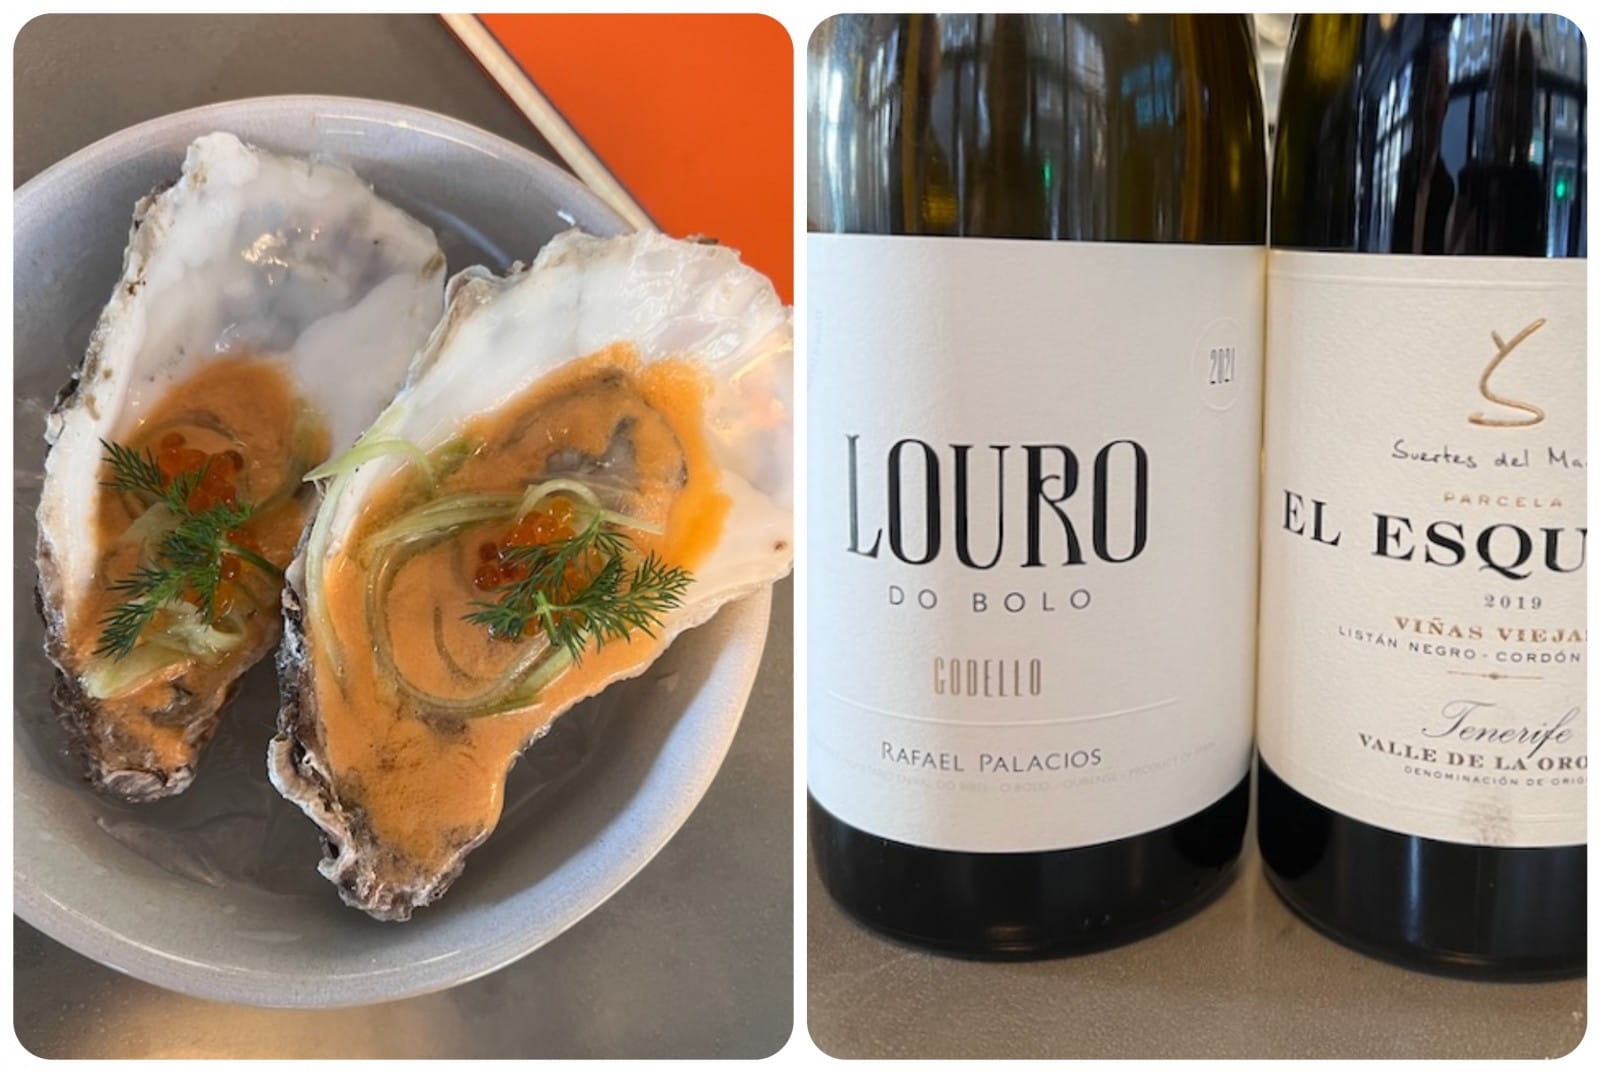 Oysters with gazpacho and godello